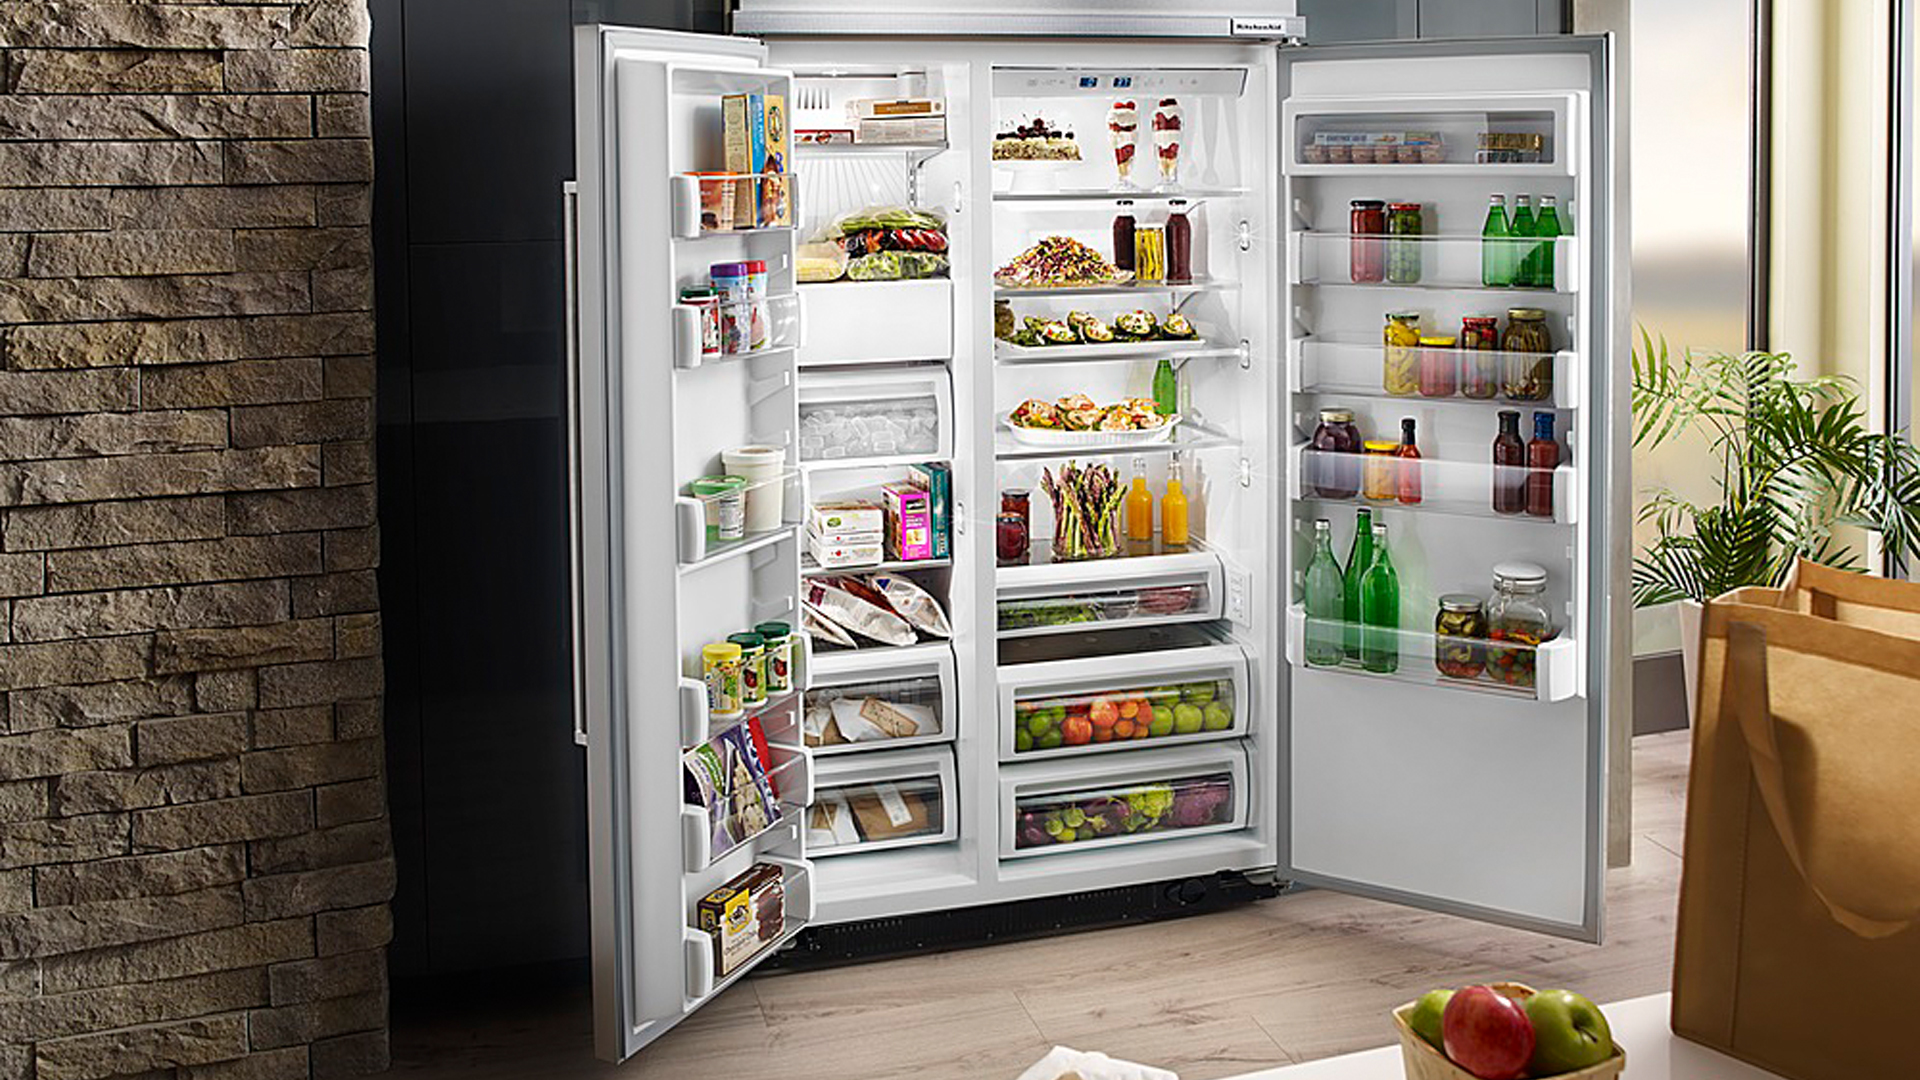 KitchenAid KBSD608ESS review: image of open refrigerator within a home